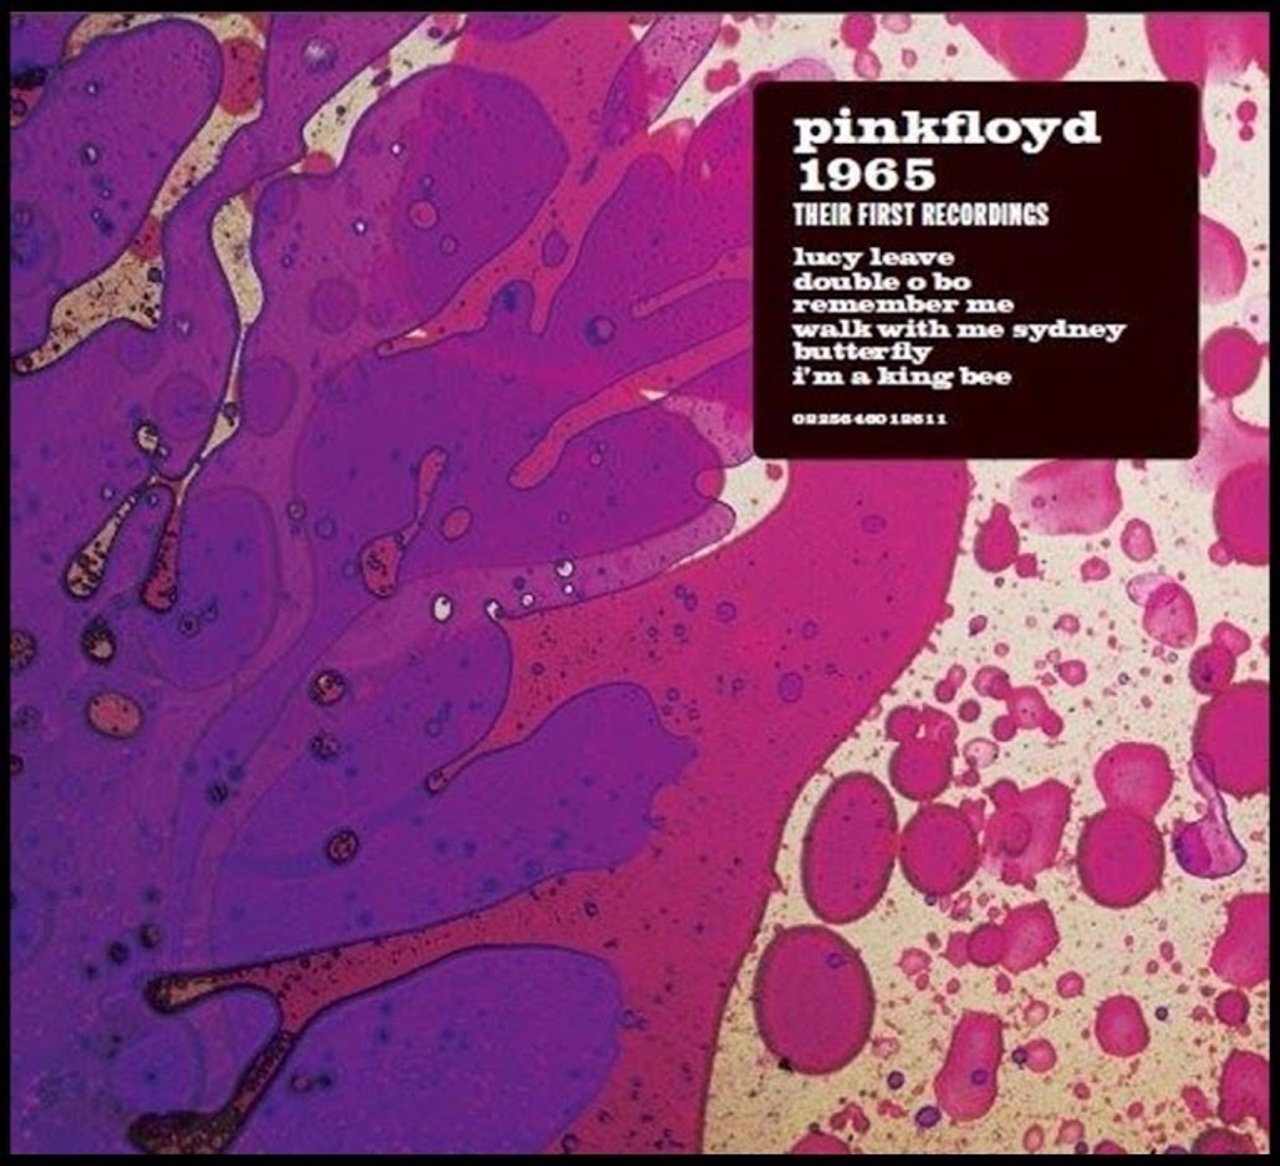 Pink Floyd 1965 - The First recordings